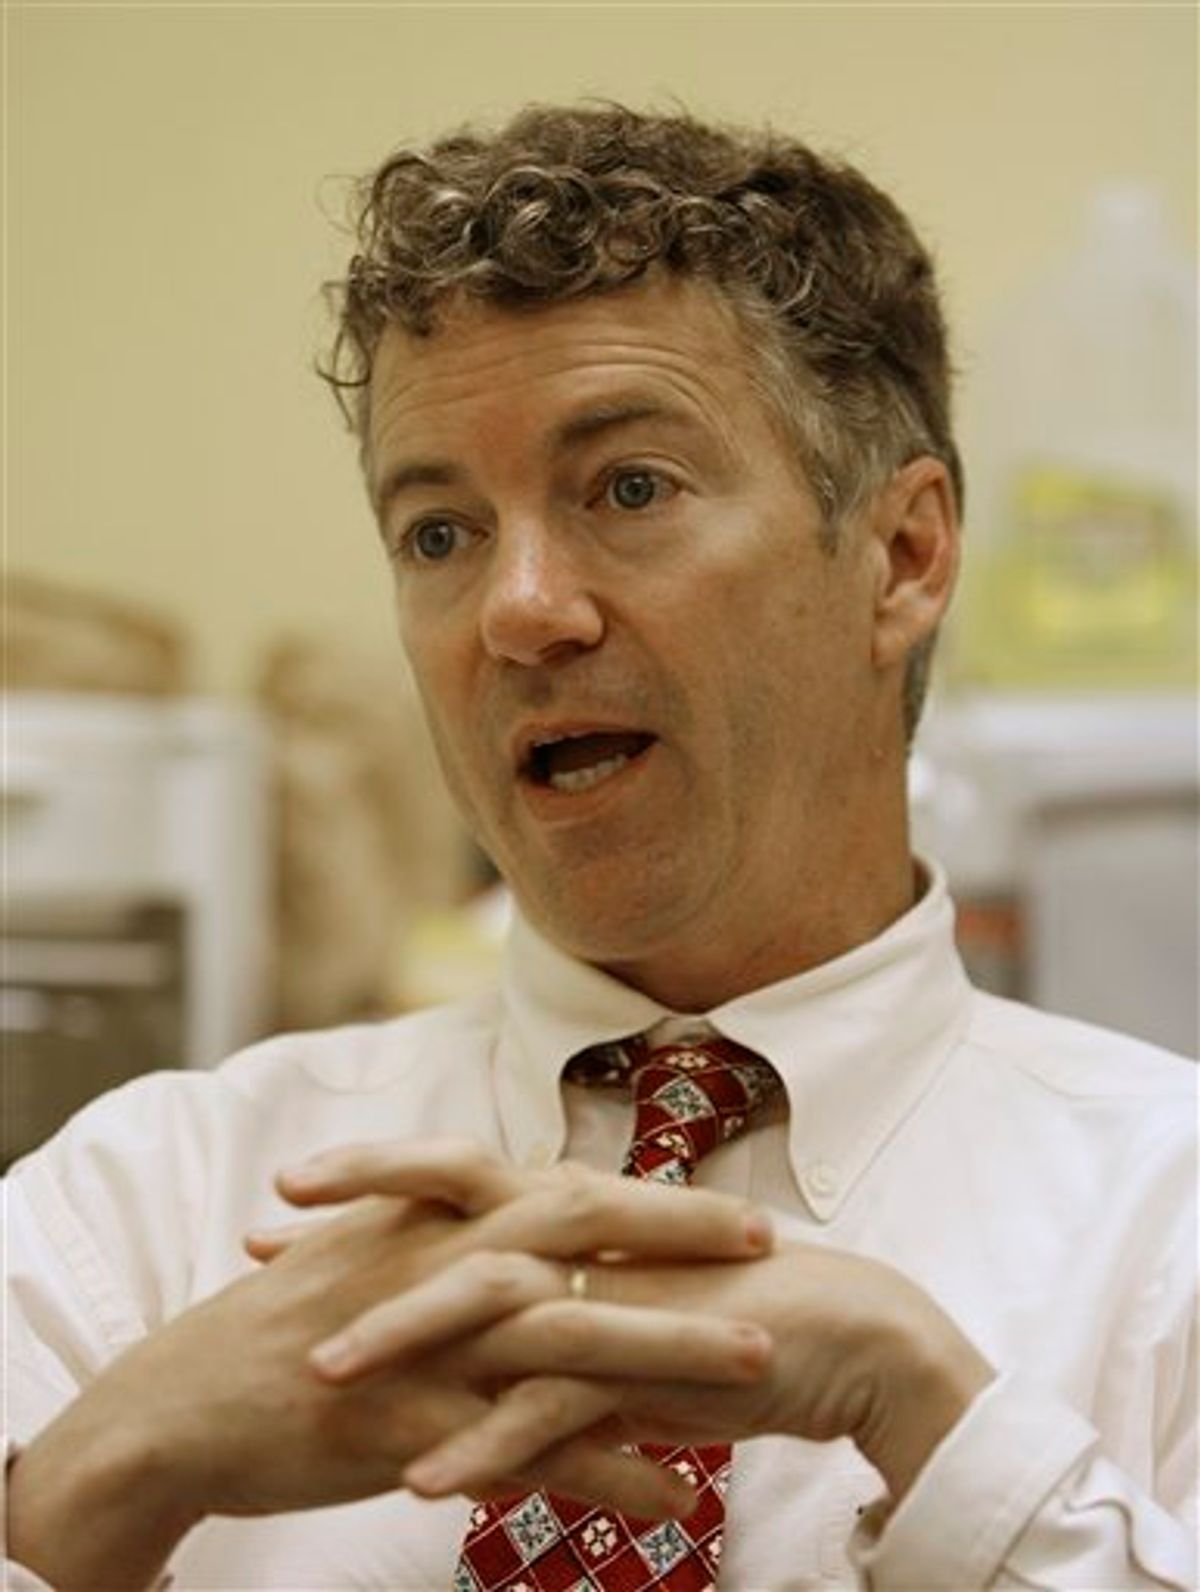 Republican U.S. Senate candidate Rand Paul is shown during an interview at his campaign headquarters after winning his party's primary election in Bowling Green, Ky., Wednesday, May 19, 2010.  (AP Photo/Ed Reinke) (AP)